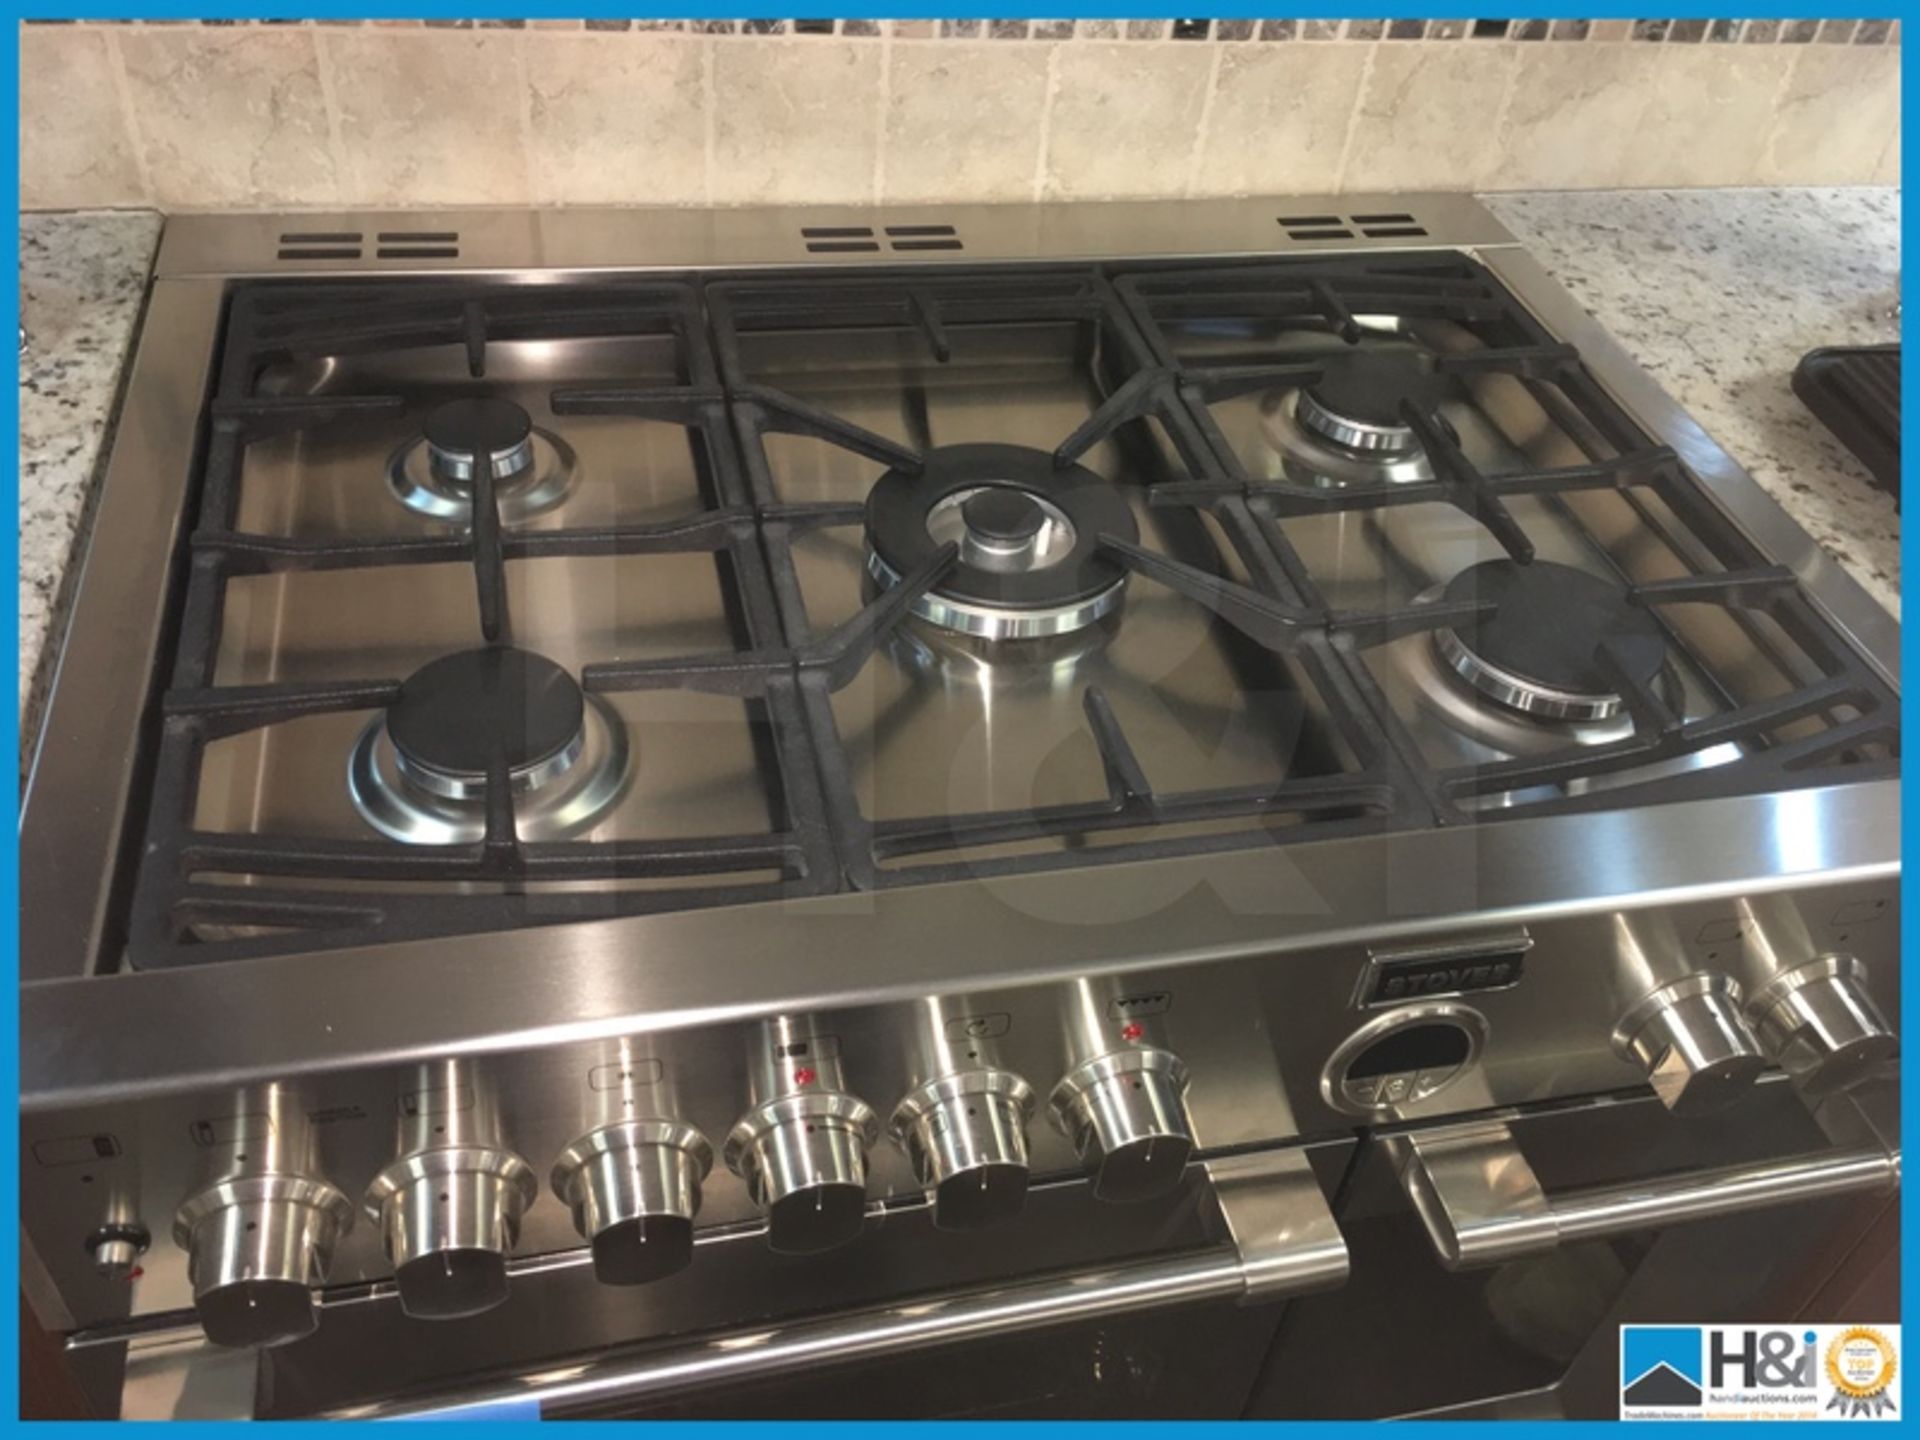 Stoves stainless steel double oven 800 wide with 5 gas burners and lower pan storage. Also - Image 2 of 7